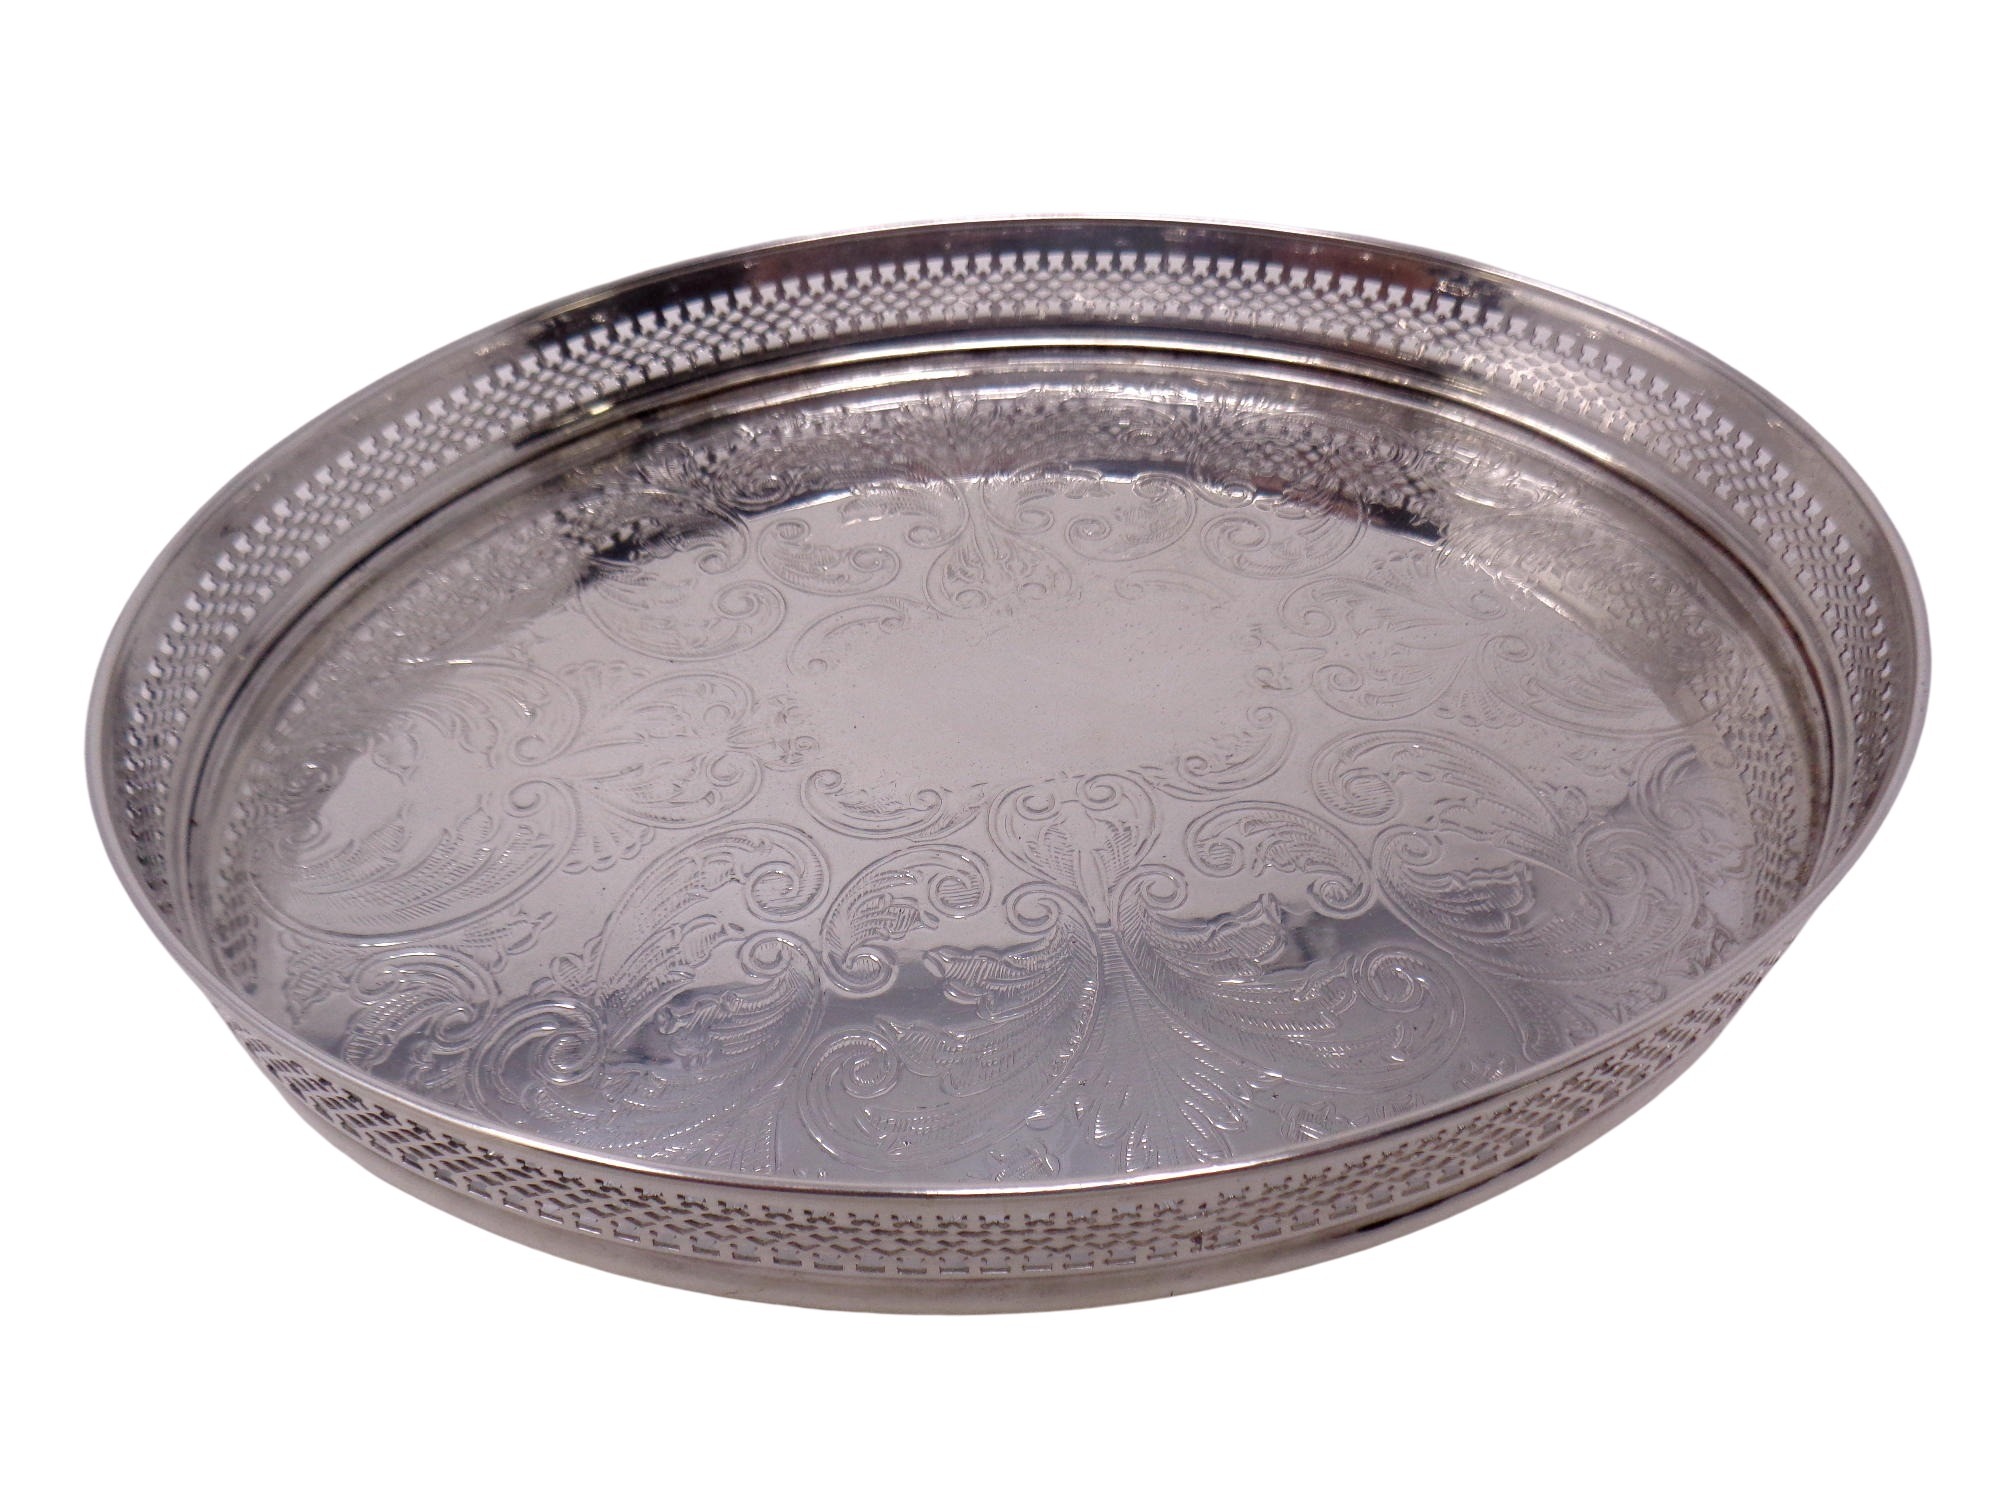 A cavalier silver plated galleried wine coaster